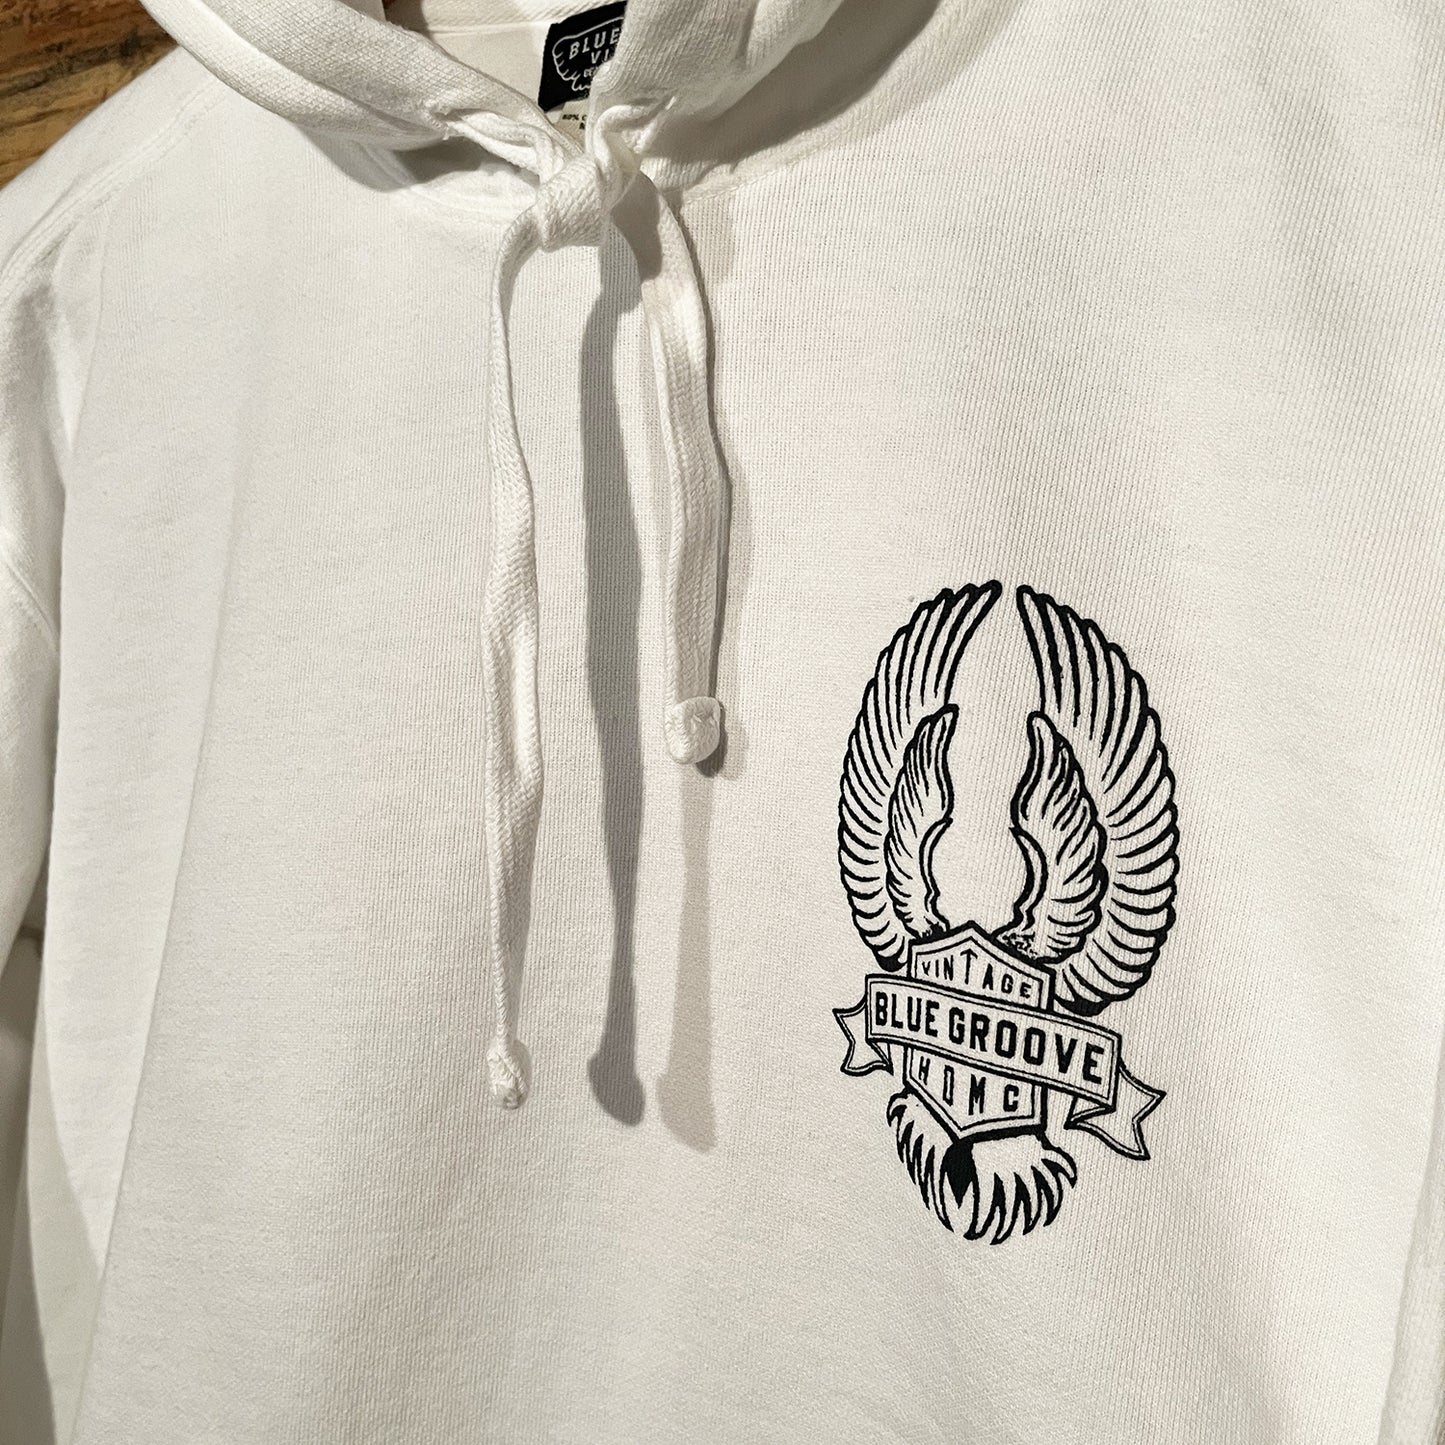 “BRING ‘EM BACK TO LIFE” PULL-OVER HOODIE - WHITE